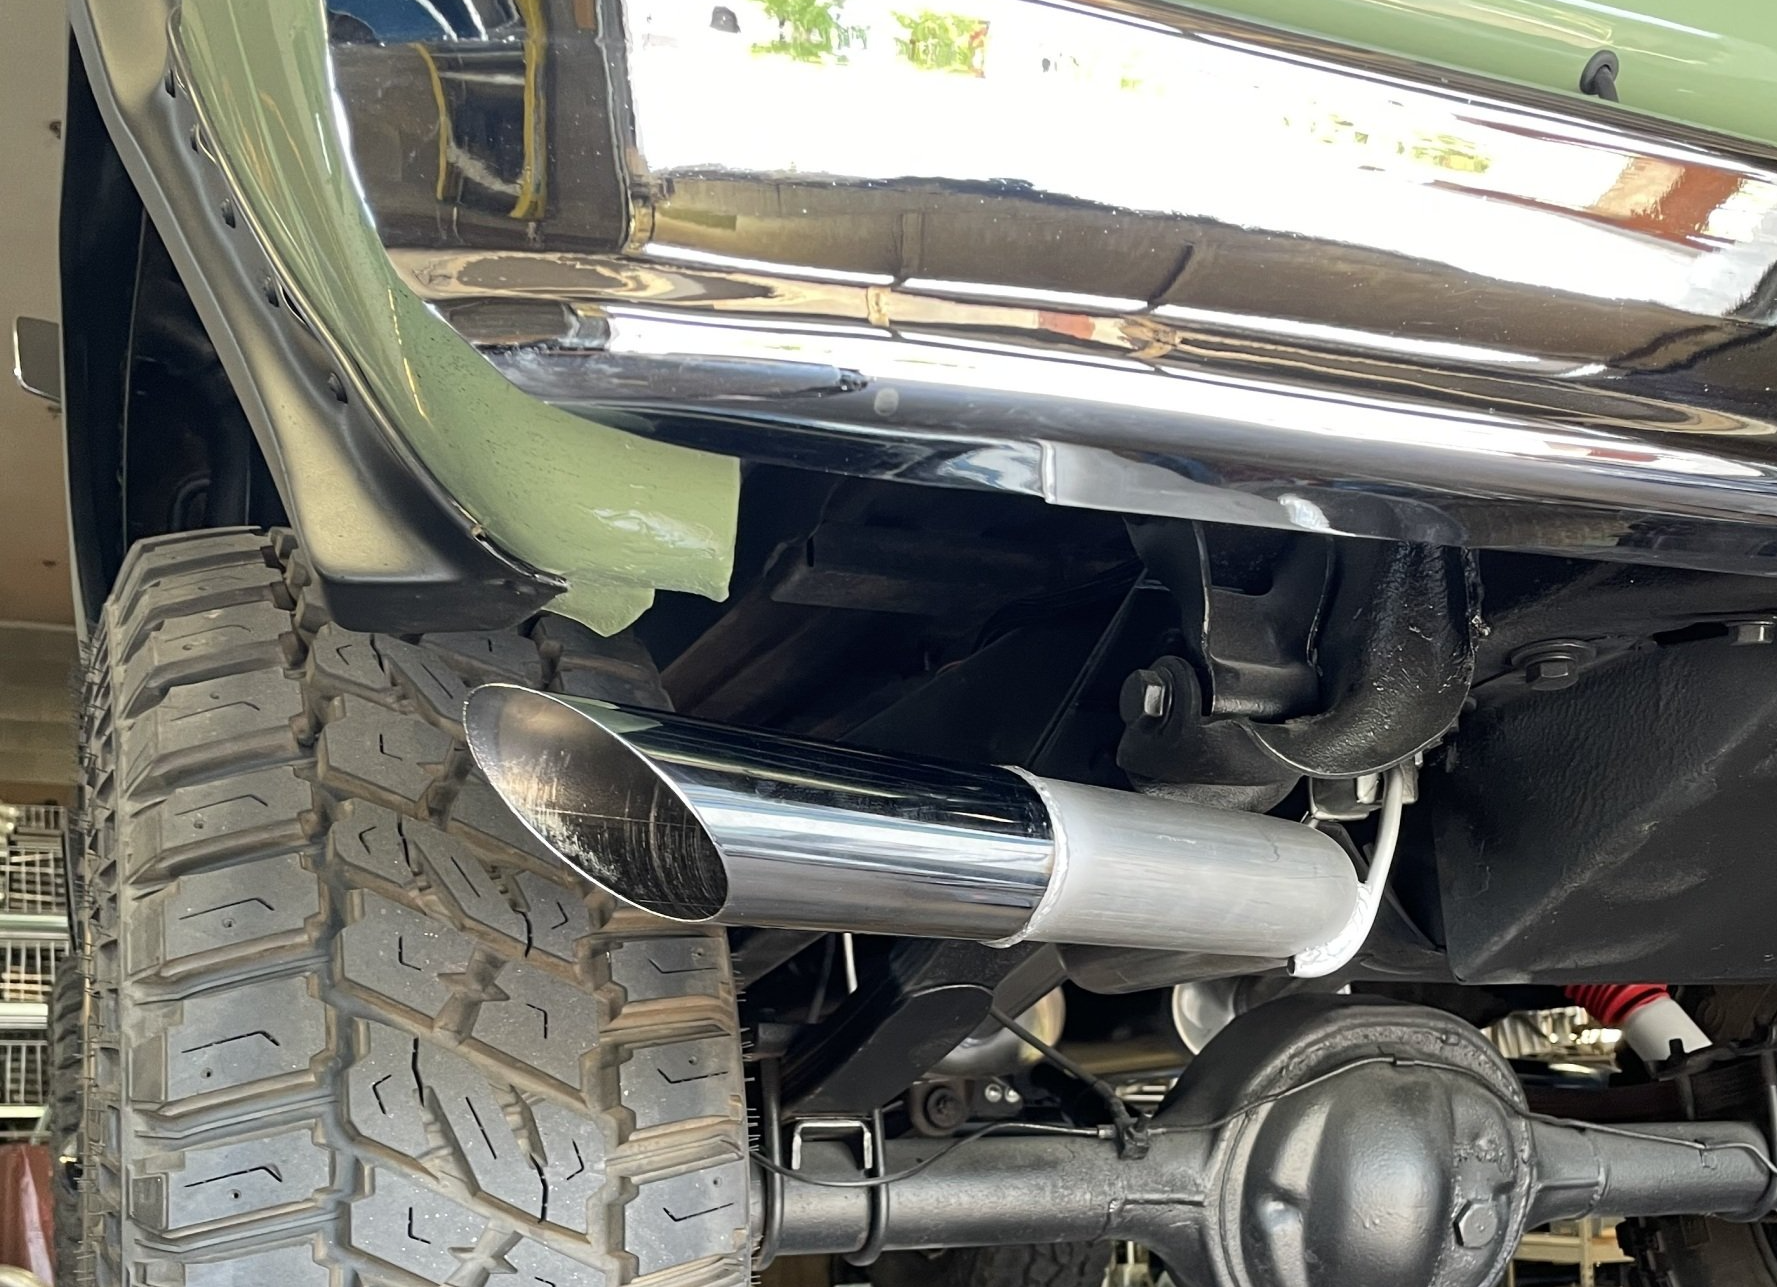 Car exhaust system